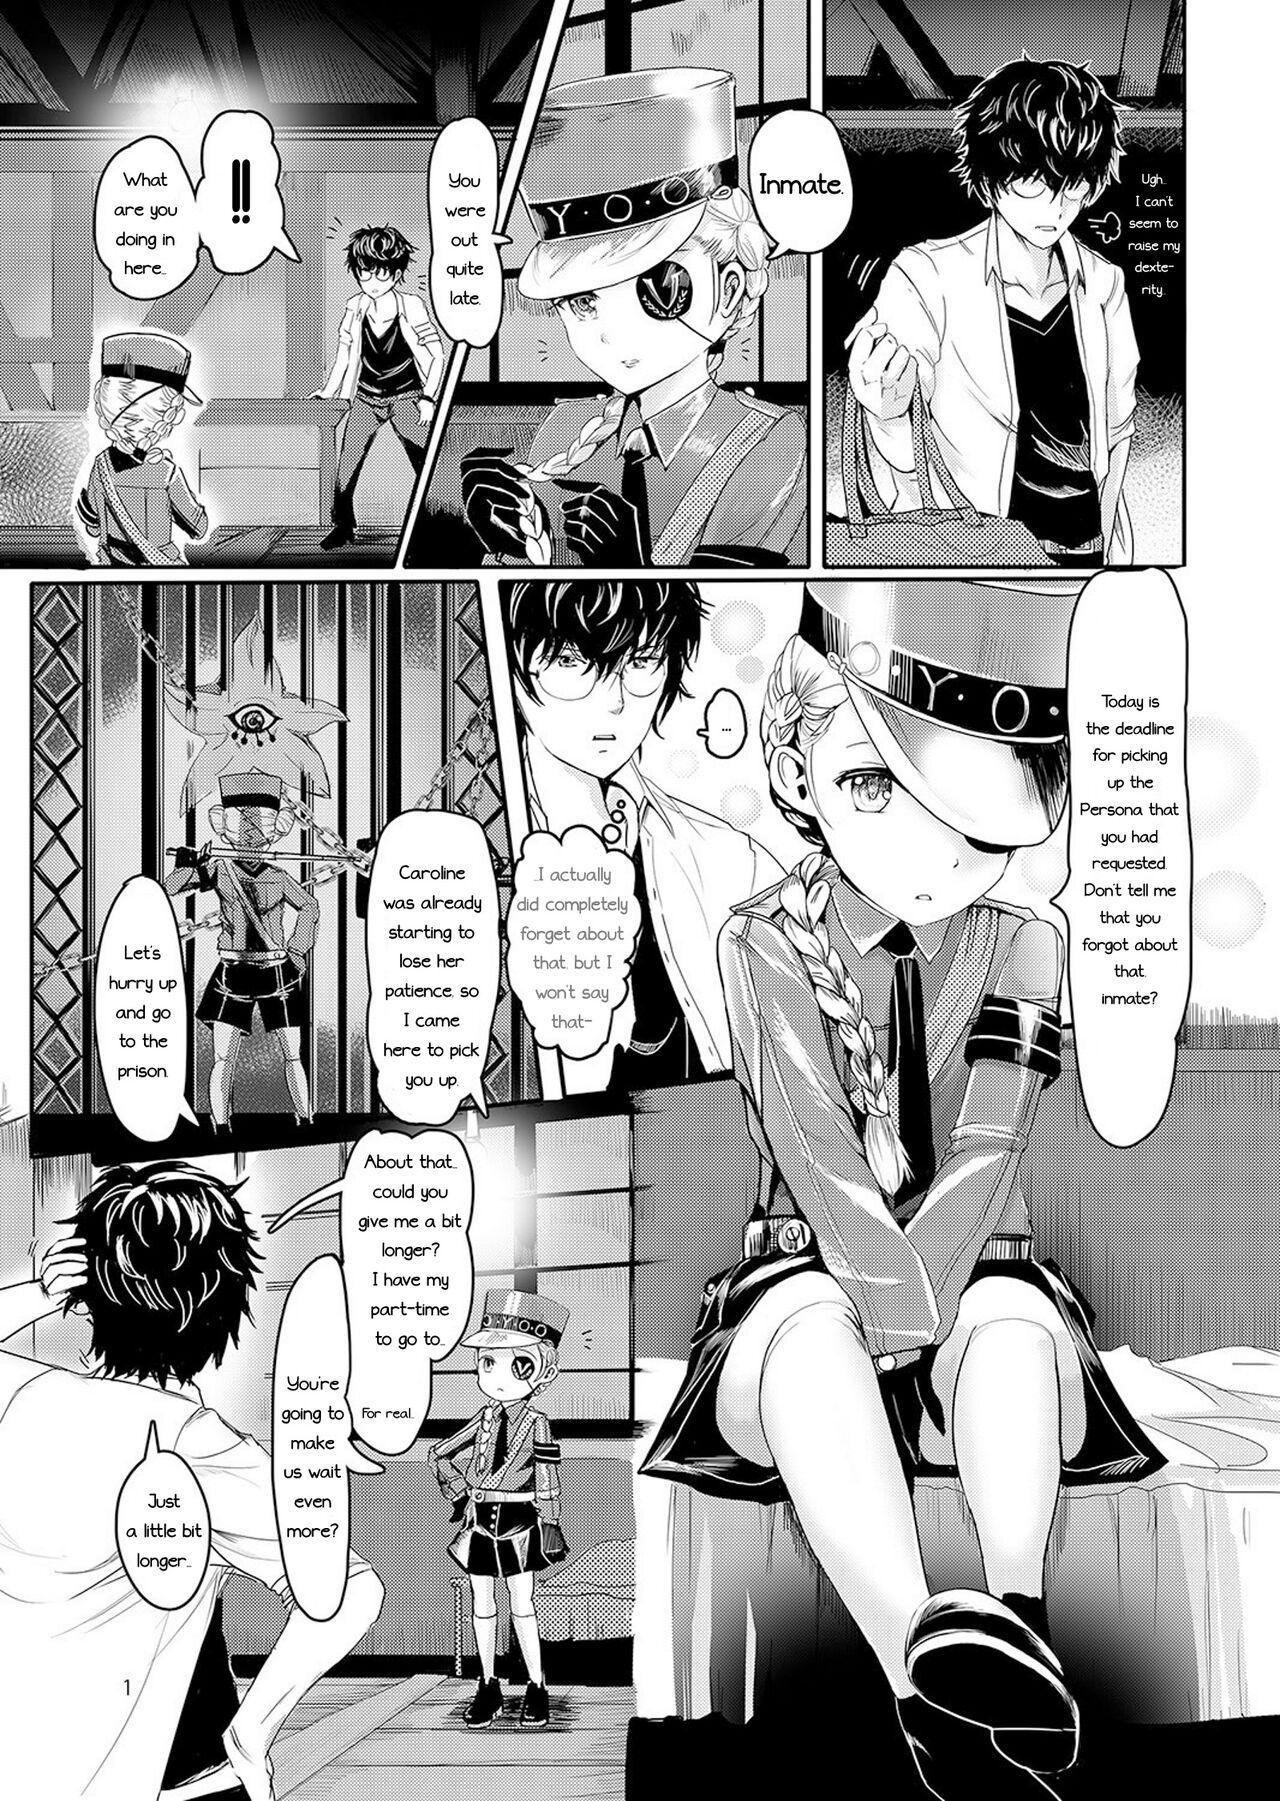 Crazy Justing - Persona 5 Teen Fuck - Page 2